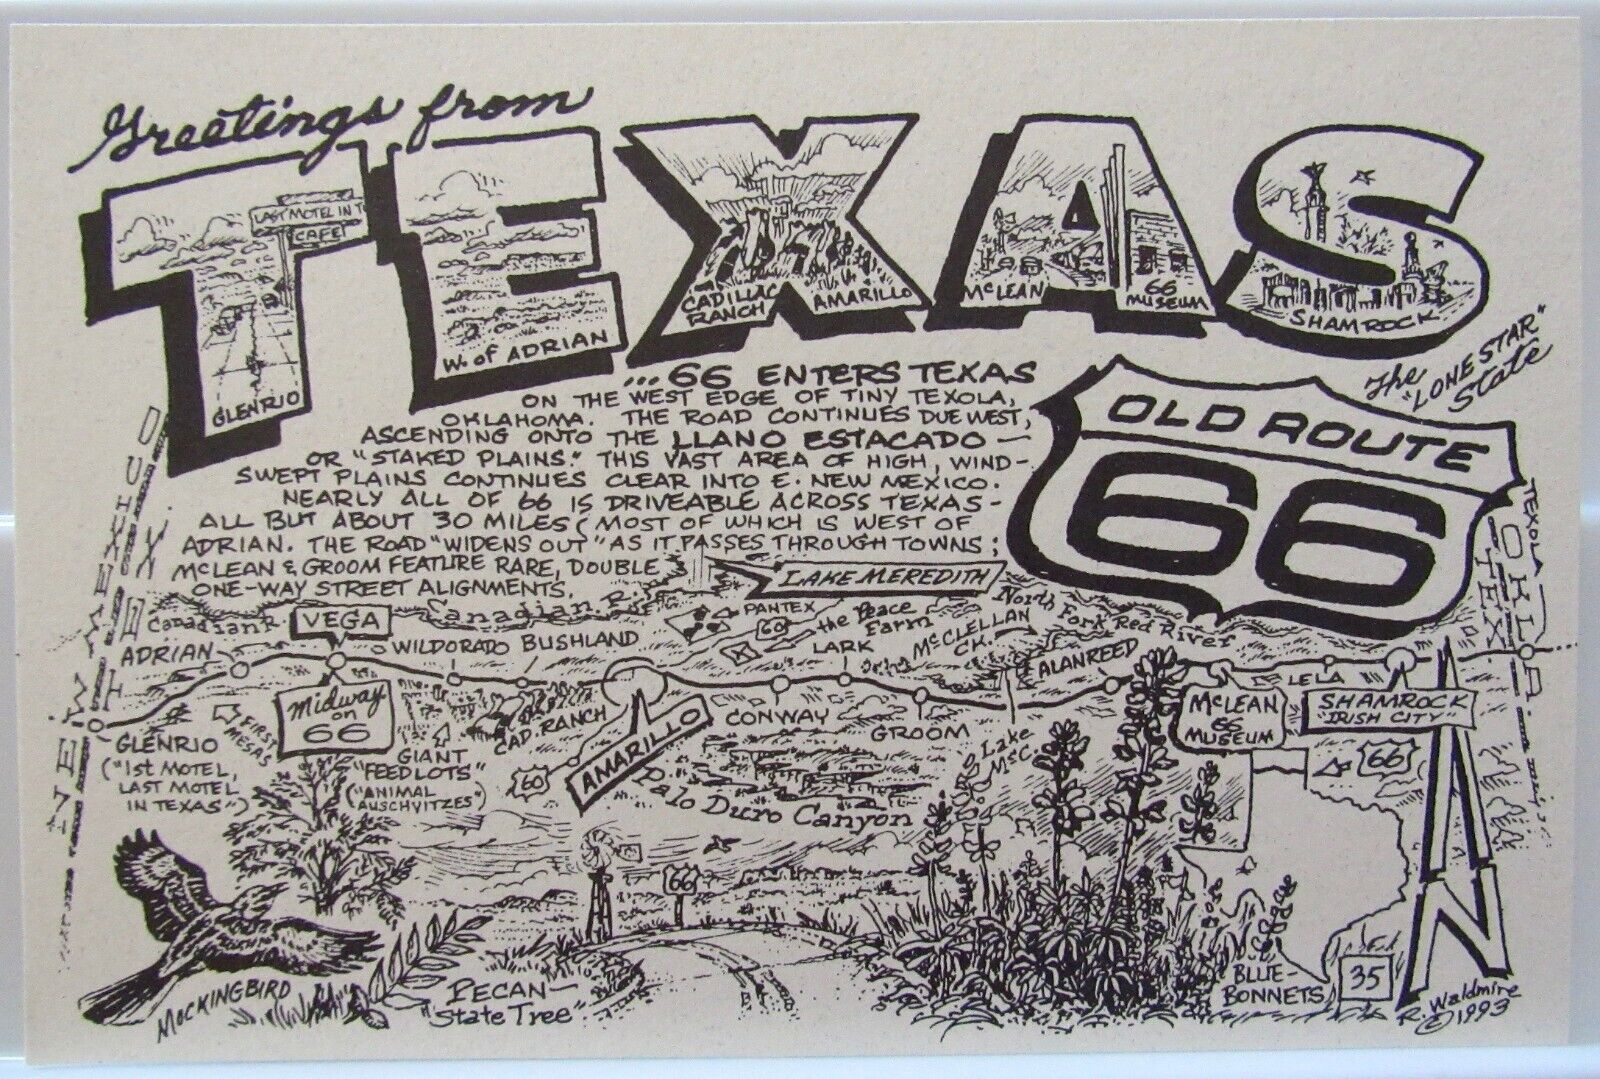 Old Route 66  R. Waldmire postcard #35.  Greetings from Texas